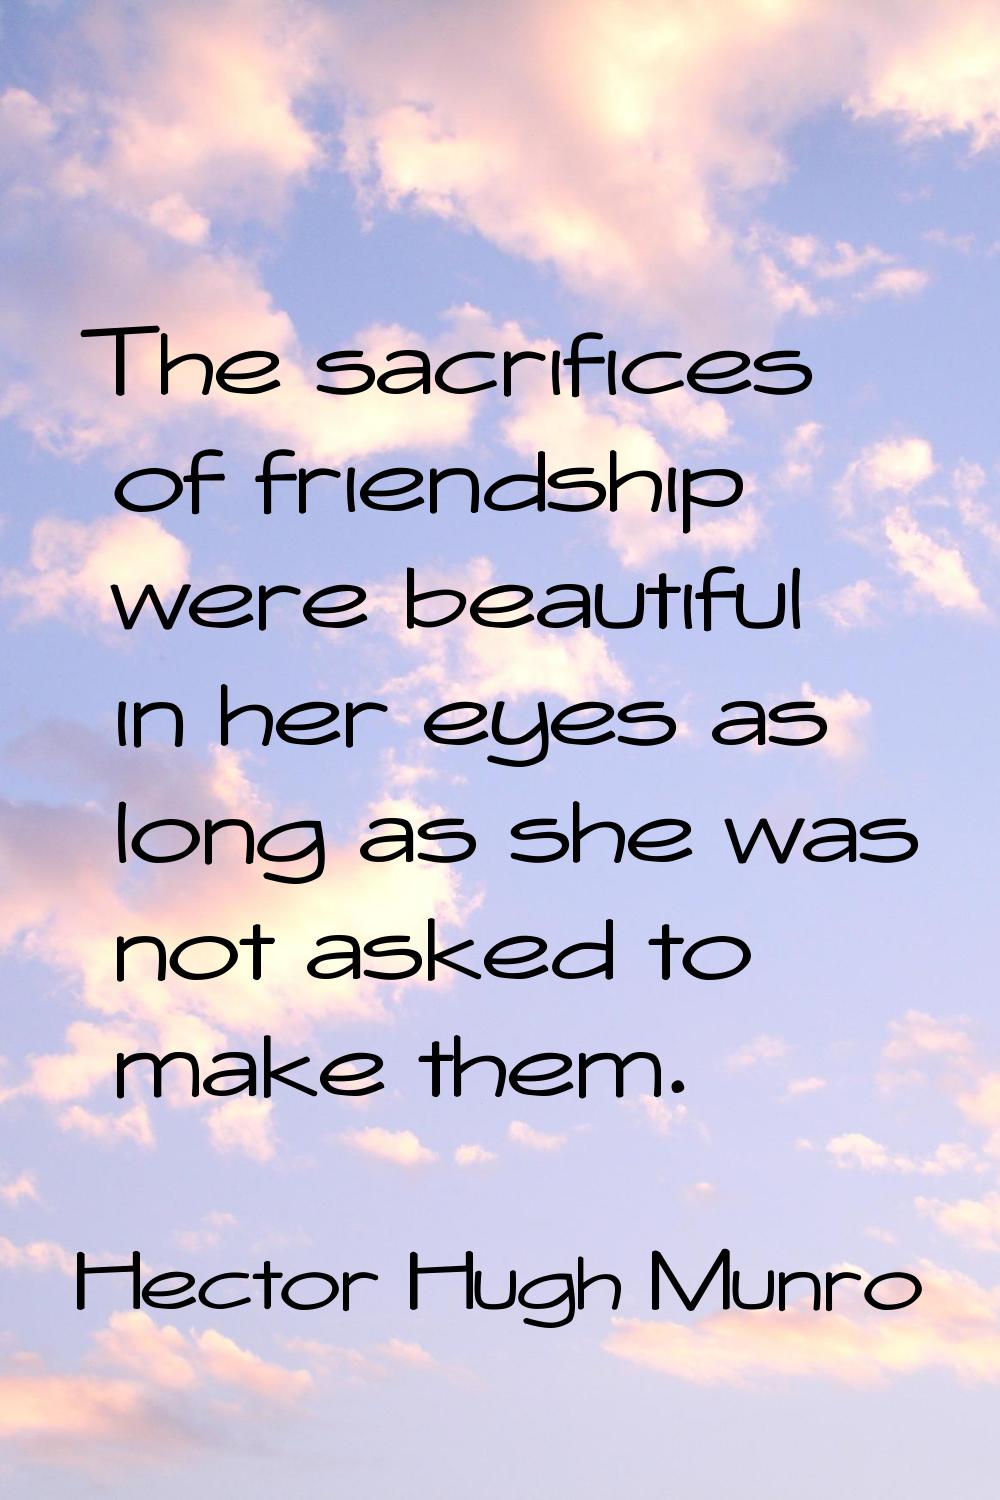 The sacrifices of friendship were beautiful in her eyes as long as she was not asked to make them.